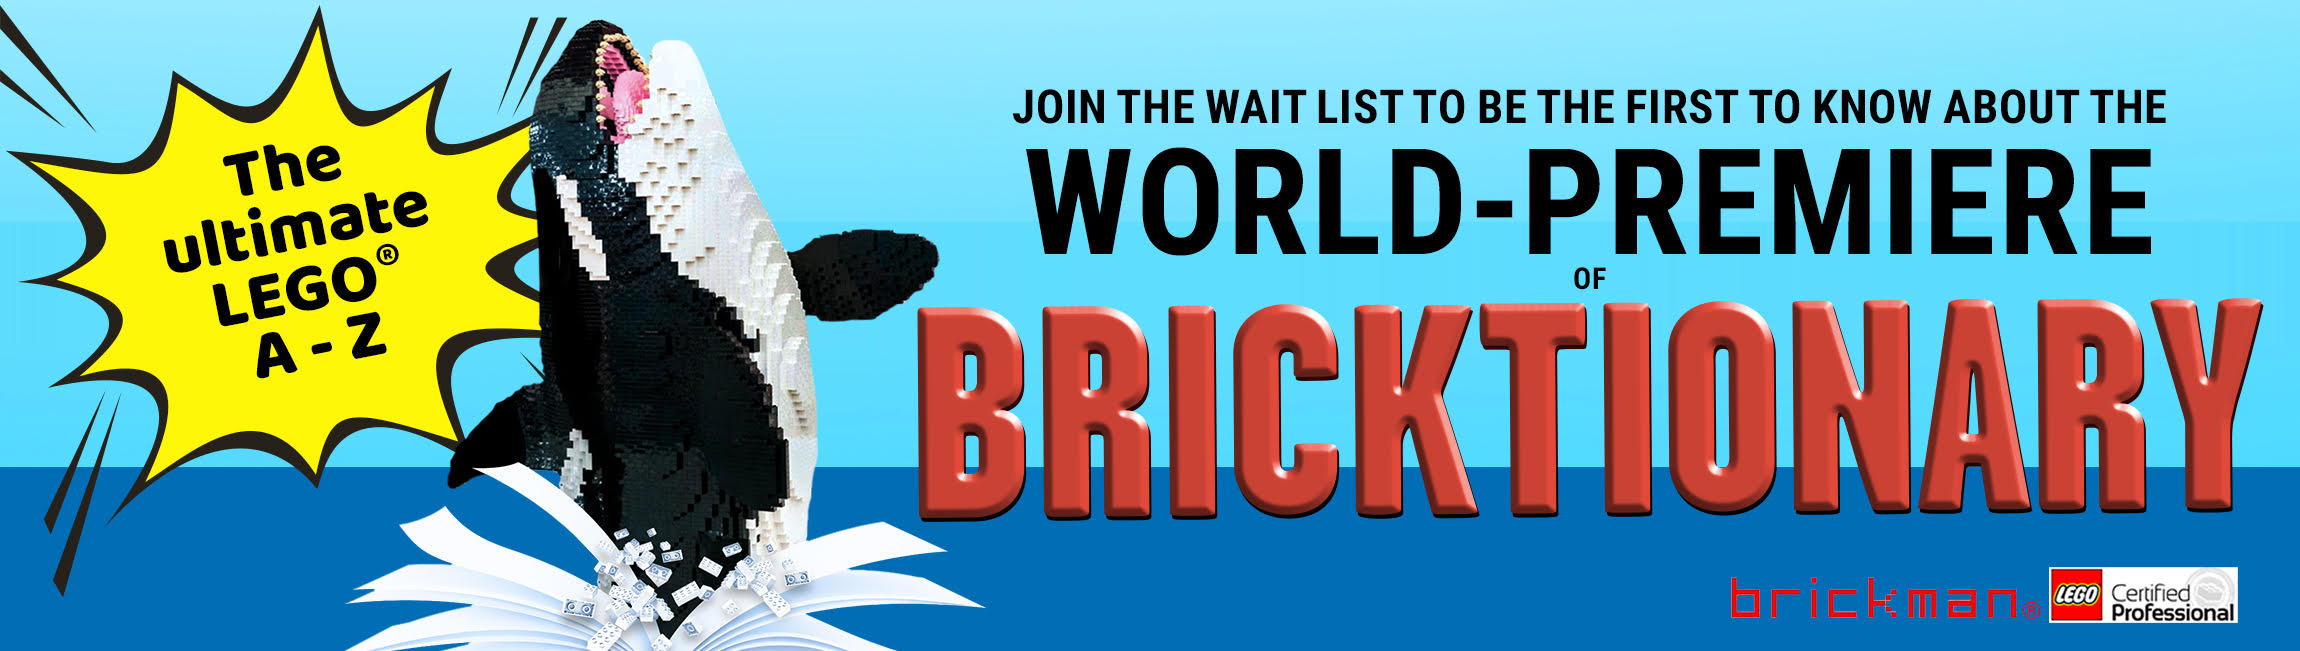 Join the waitlist to be the first to know about the world-premiere of Bricktionary: the ultimate LEGO® A-Z